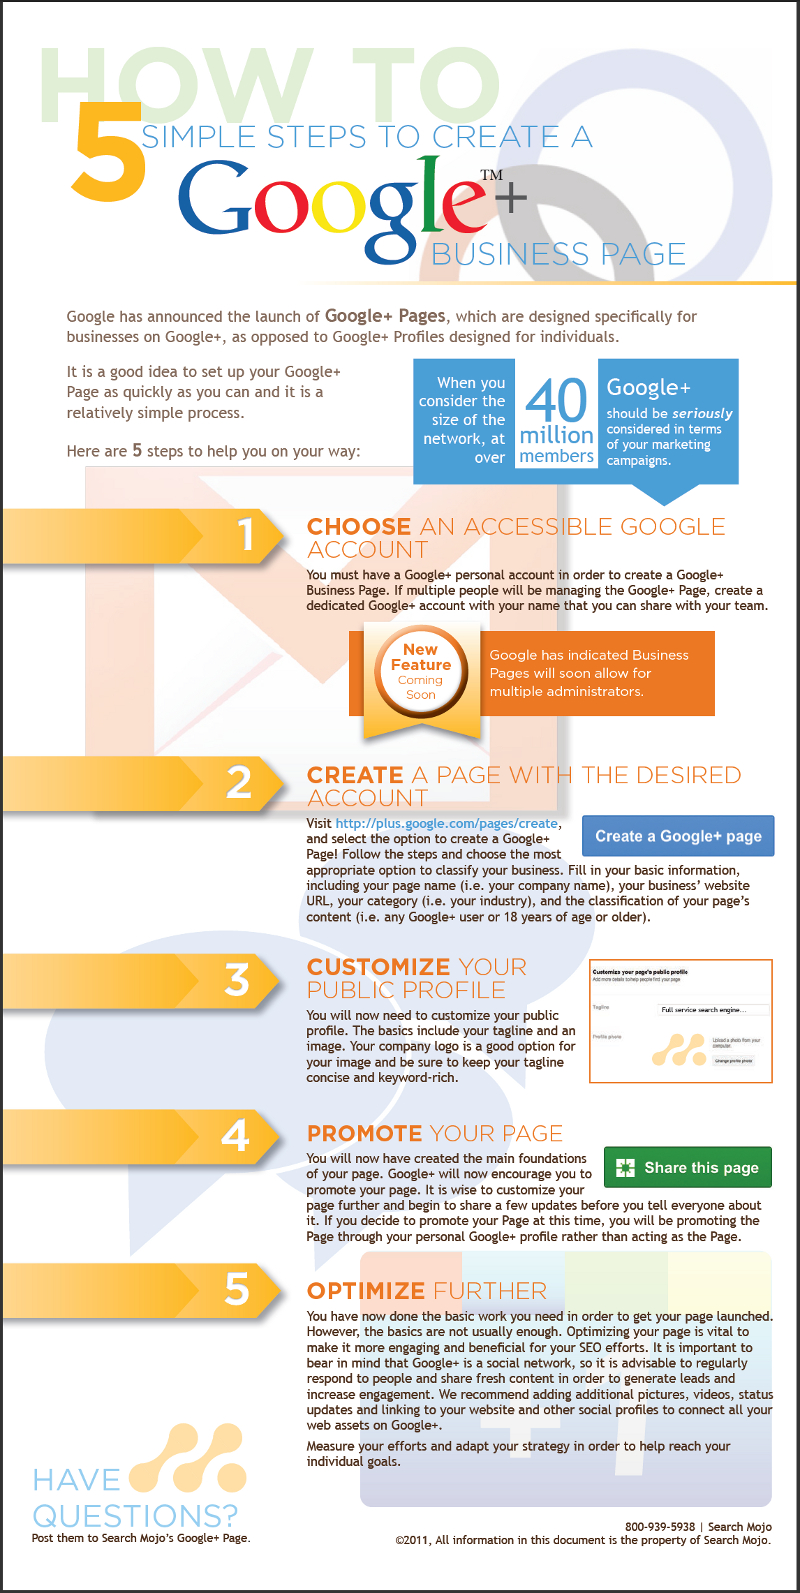 How to Create, Promote and Optimize a Google Plus Business Page